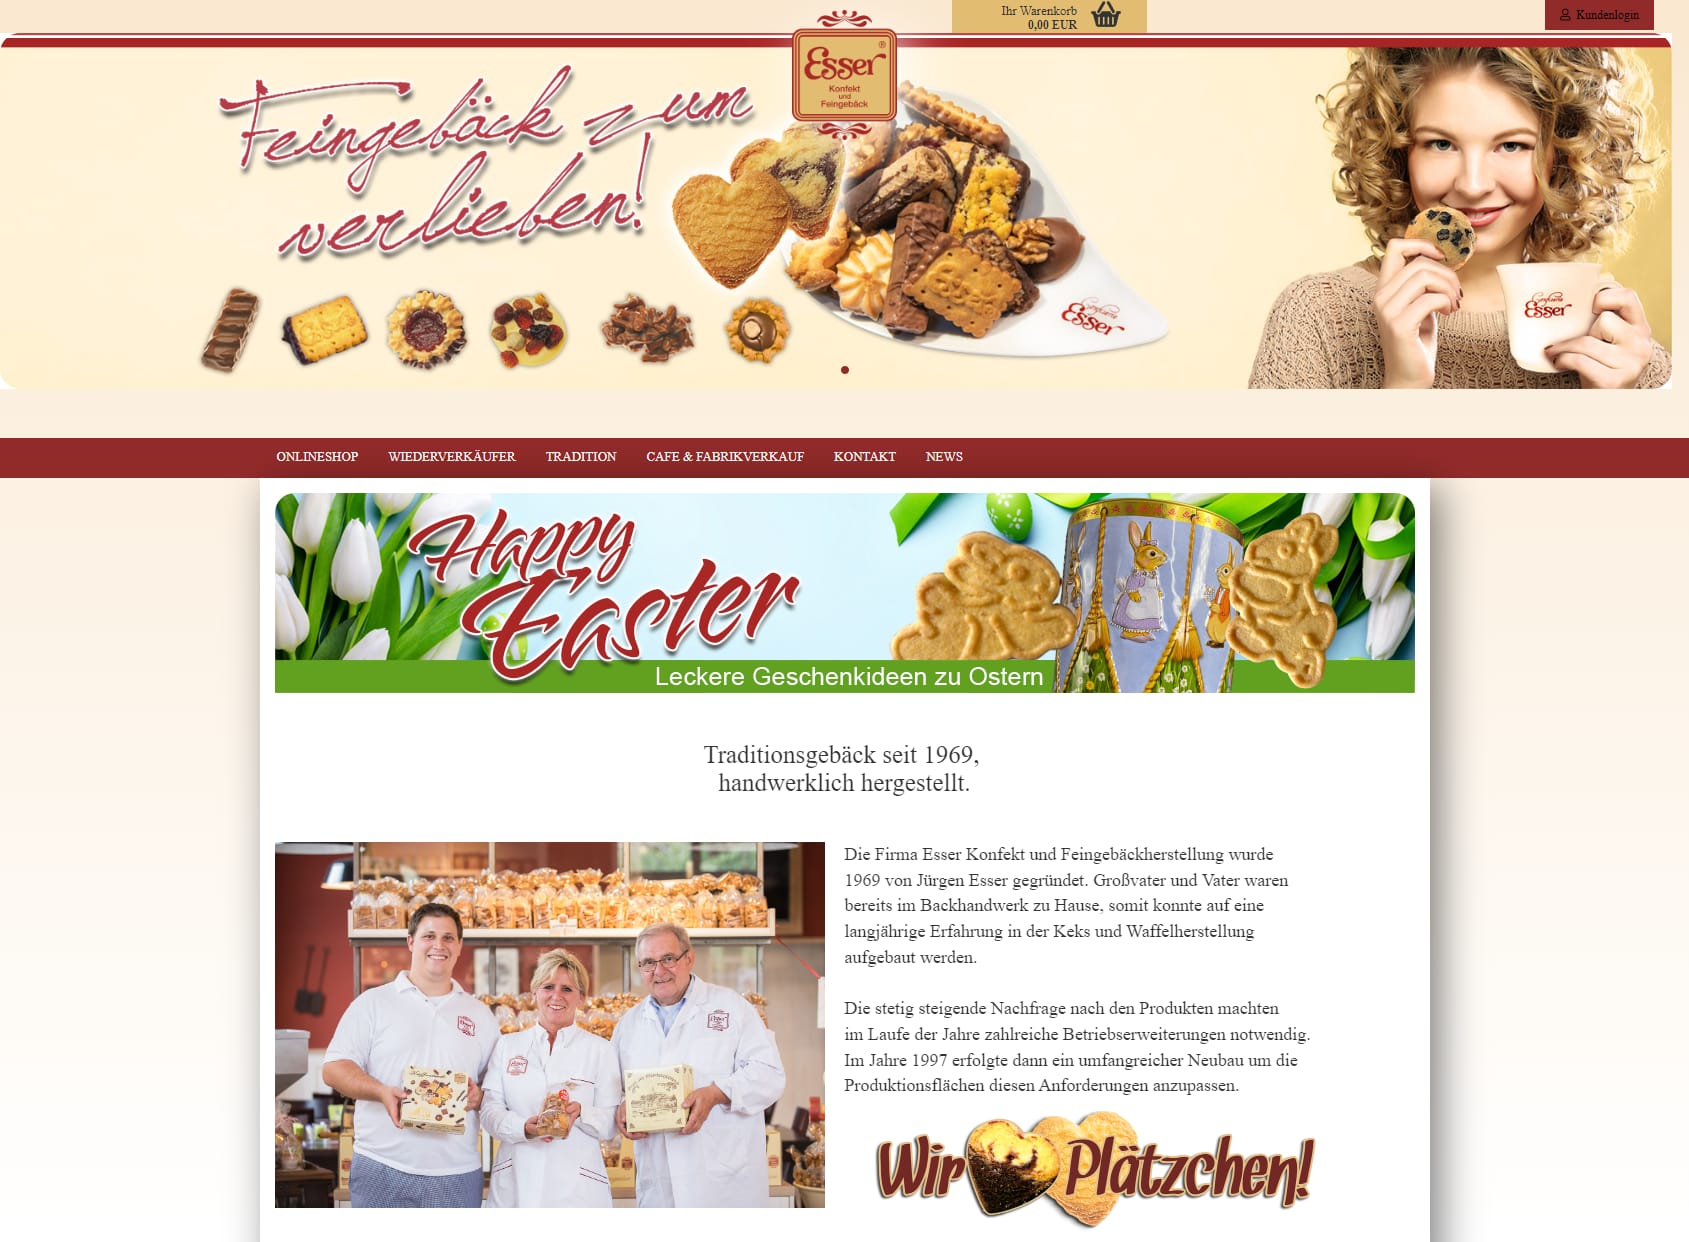 Esser confectionery and pastry GmbH & Co. KG